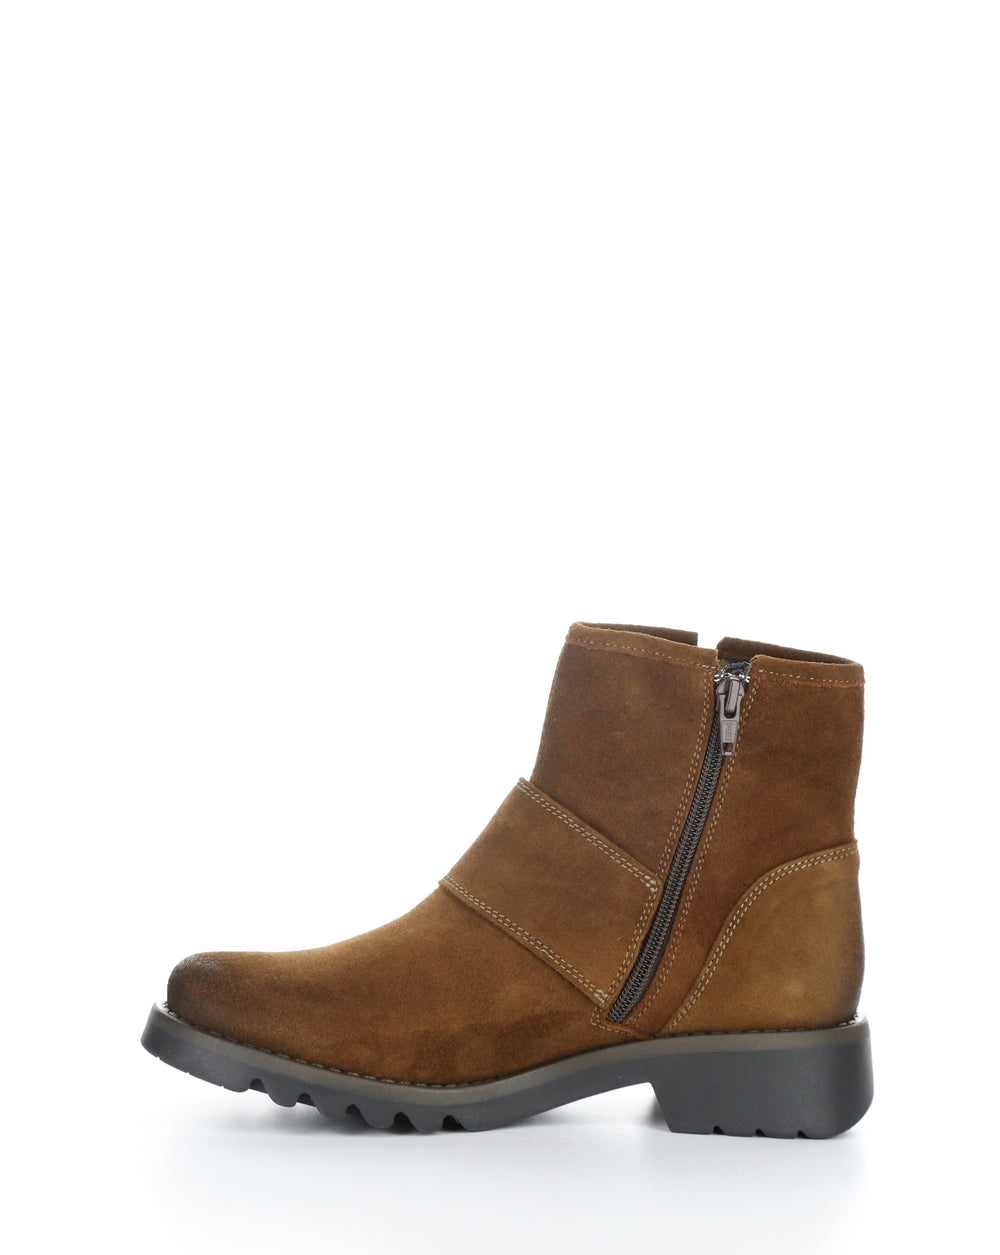 RILY991FLY 009 CAMEL Round Toe Boots